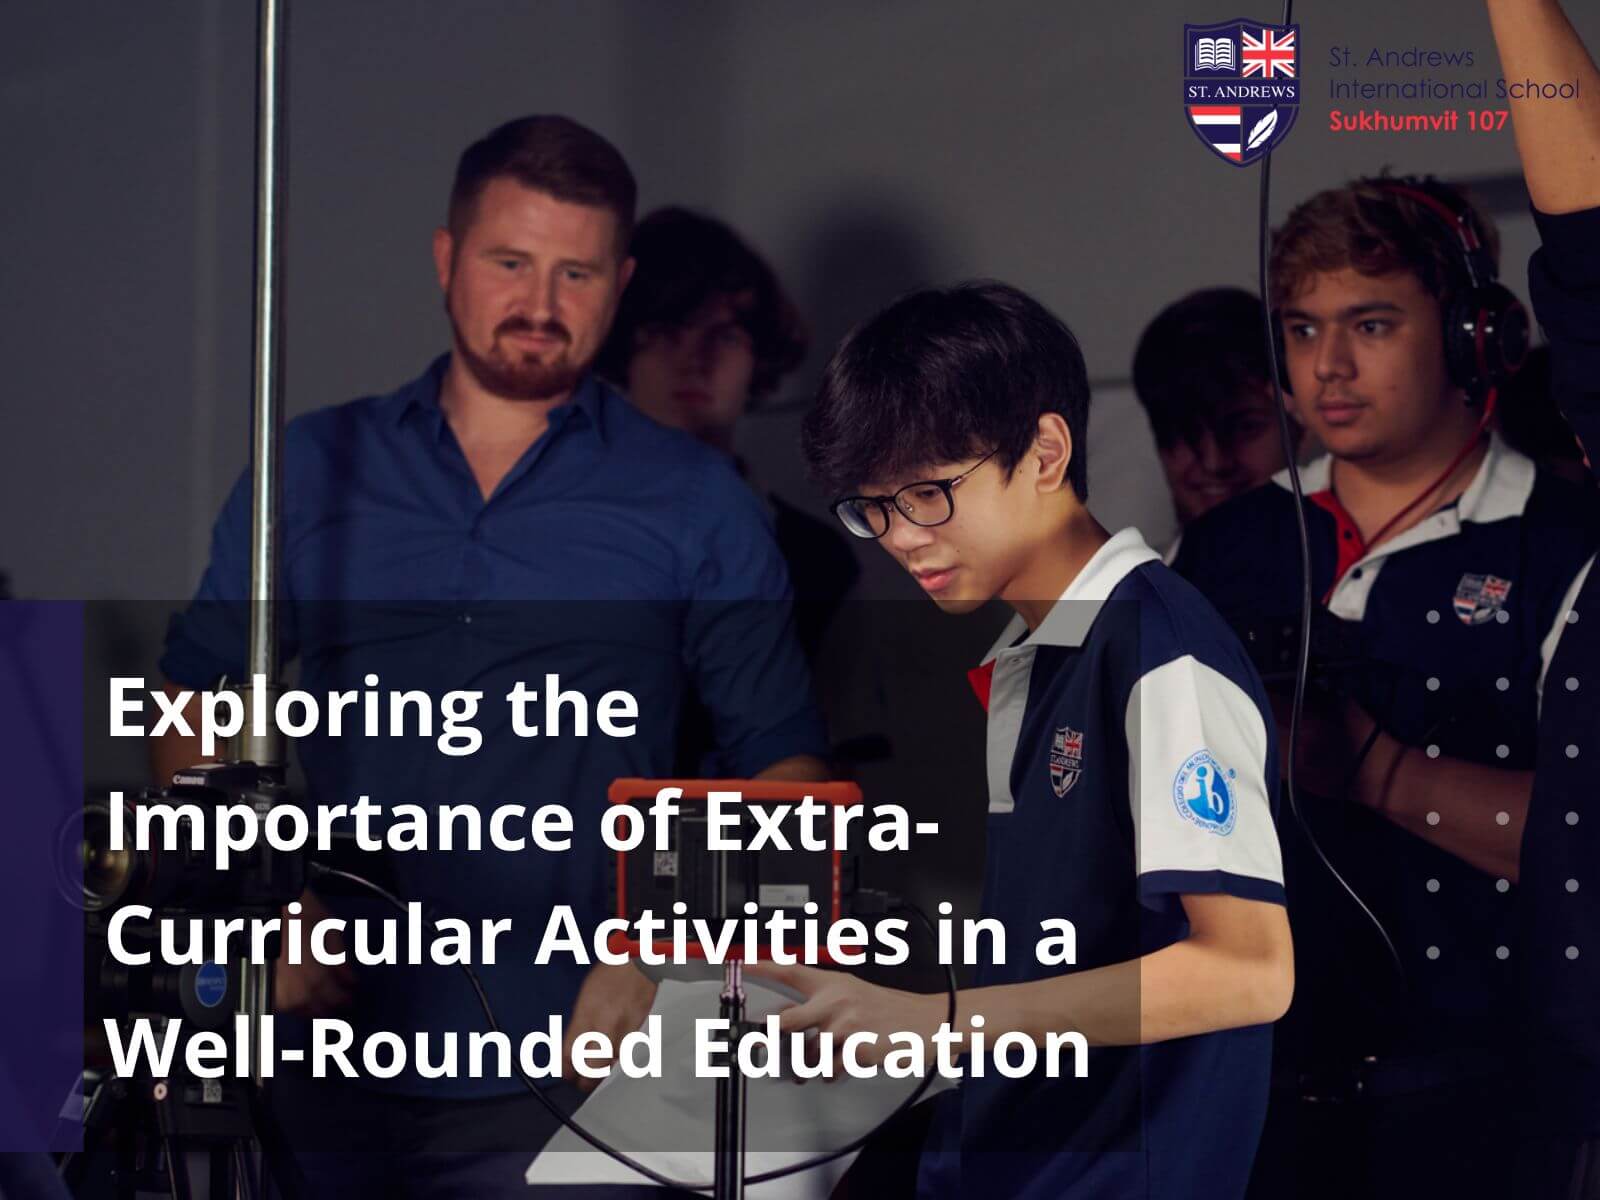 Exploring the Importance of Extra-Curricular Activities in a Well-Rounded Education